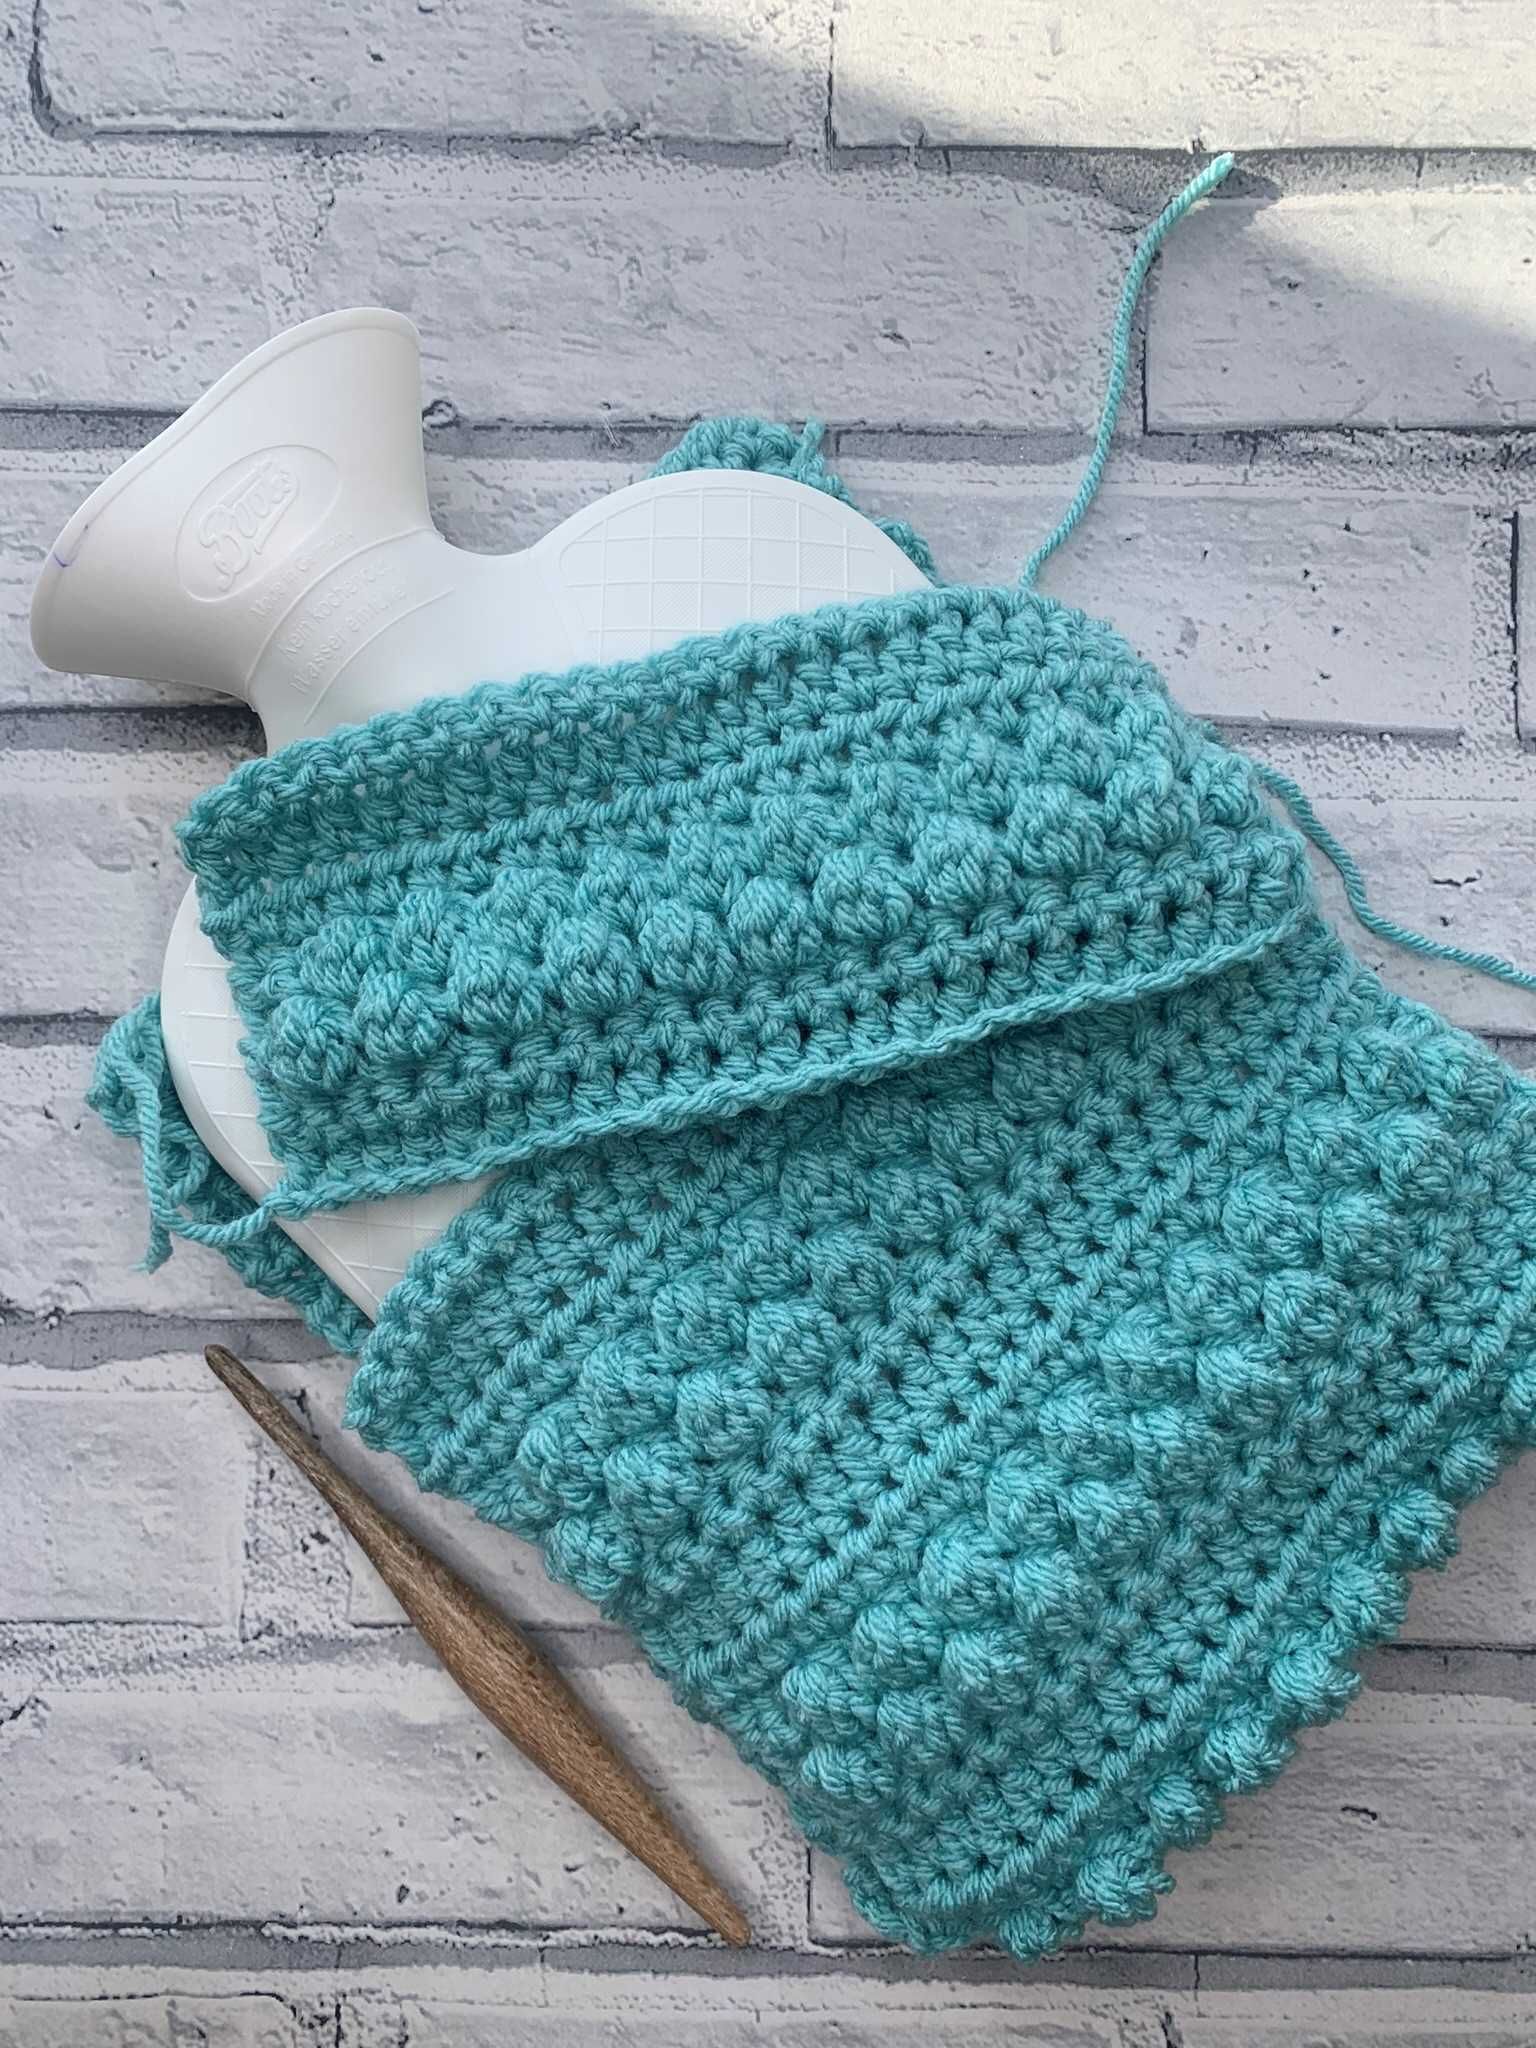 How to crochet a hot water bottle cosy